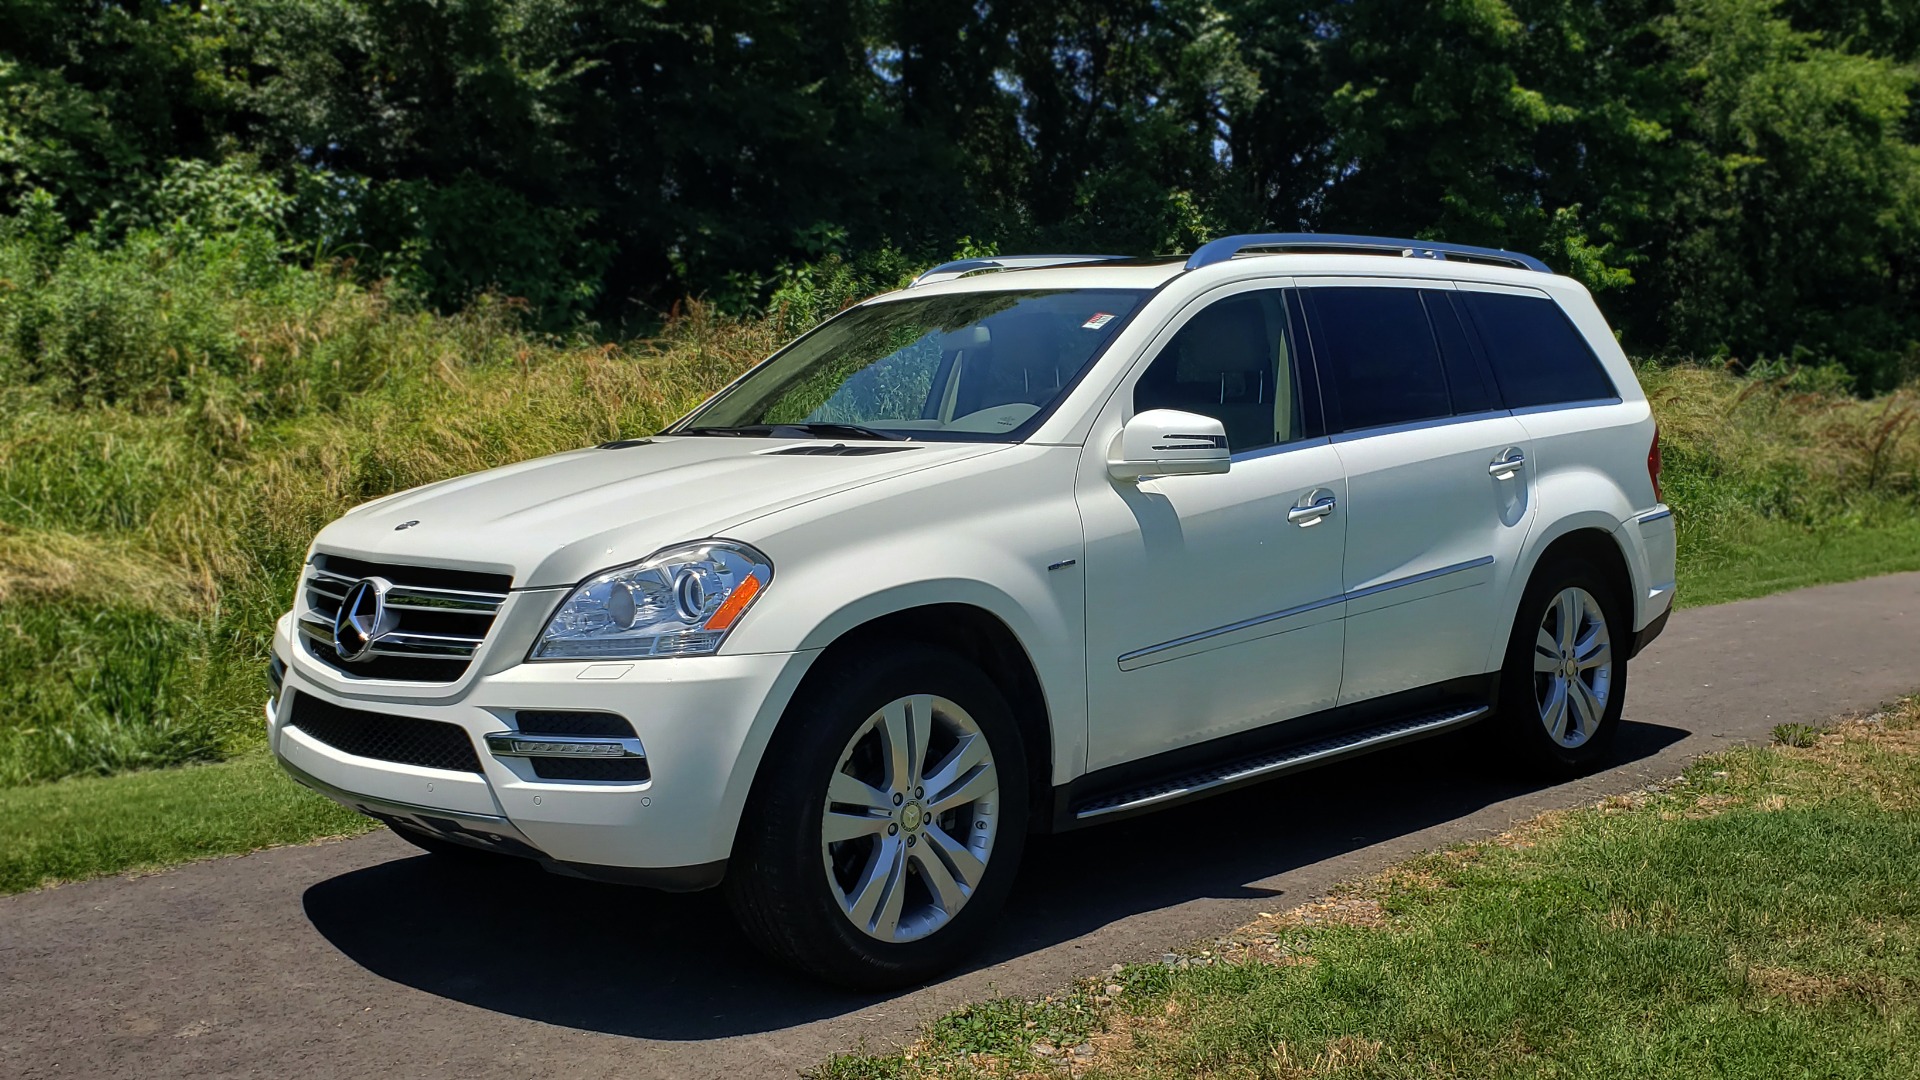 Used 2012 Mercedes-Benz GL-CLASS GL 350 BLUETEC / NAV / DUAL-ROOF / HTD STS / 3-ROW / REARVIEW for sale Sold at Formula Imports in Charlotte NC 28227 1